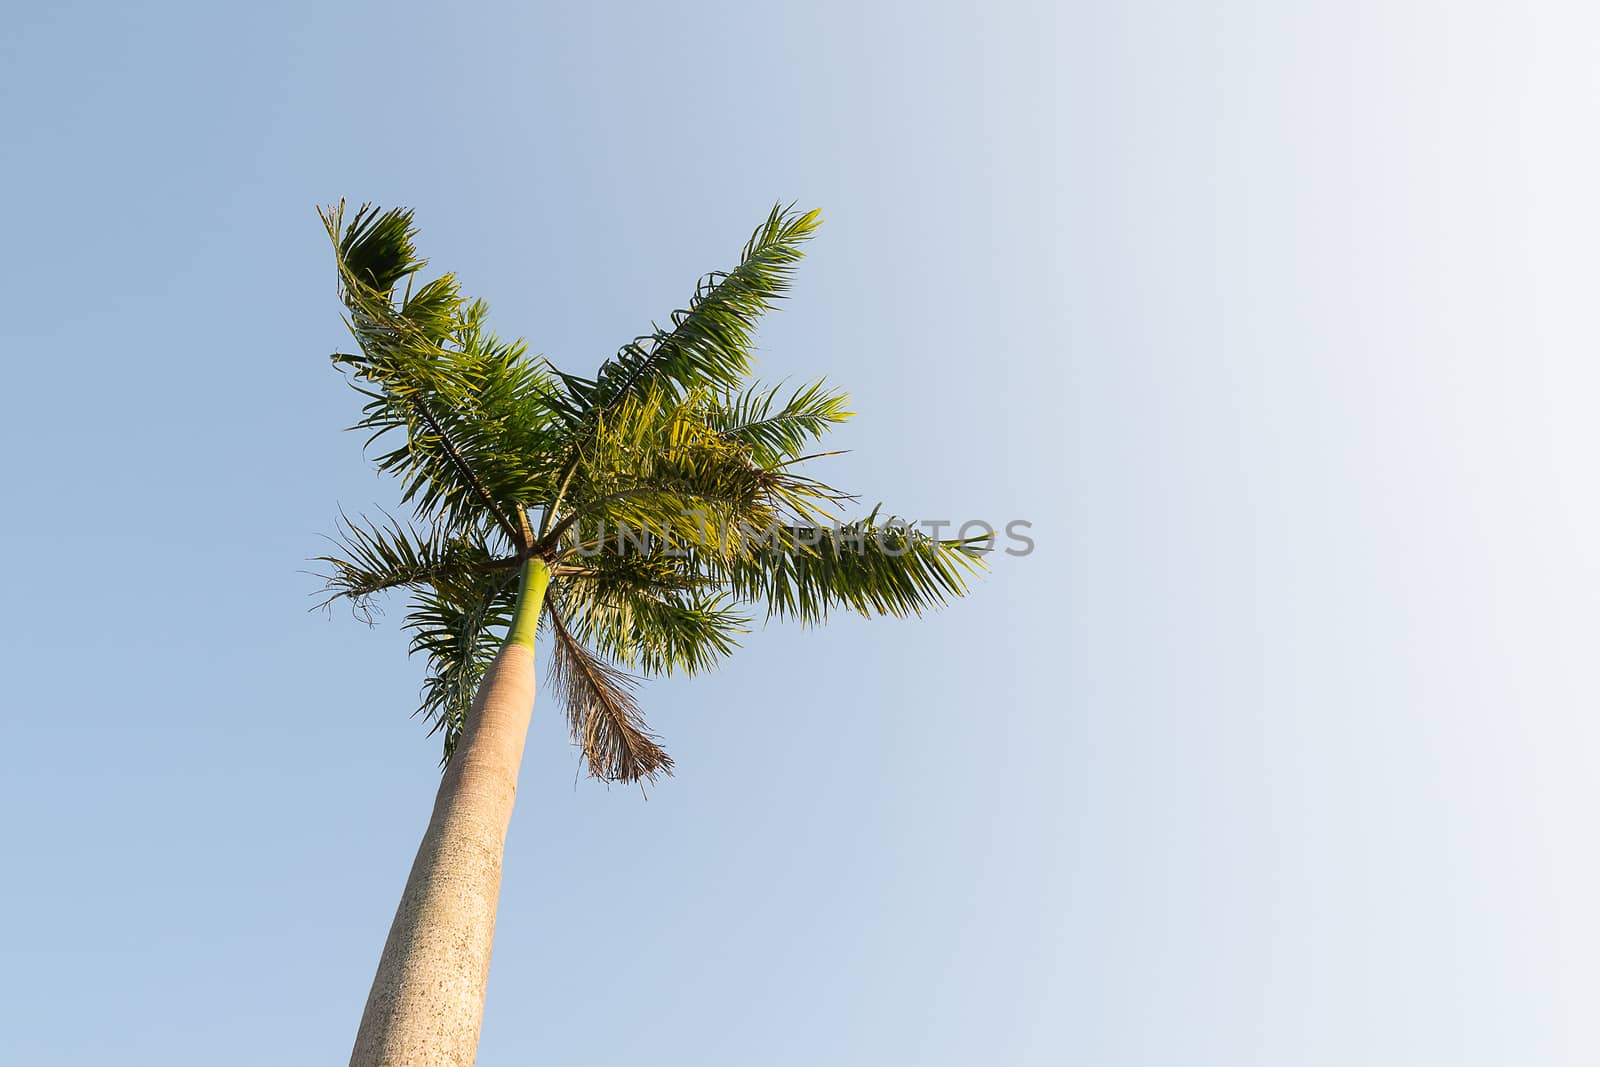 Foxtail palm tree in the wind with blue sky background